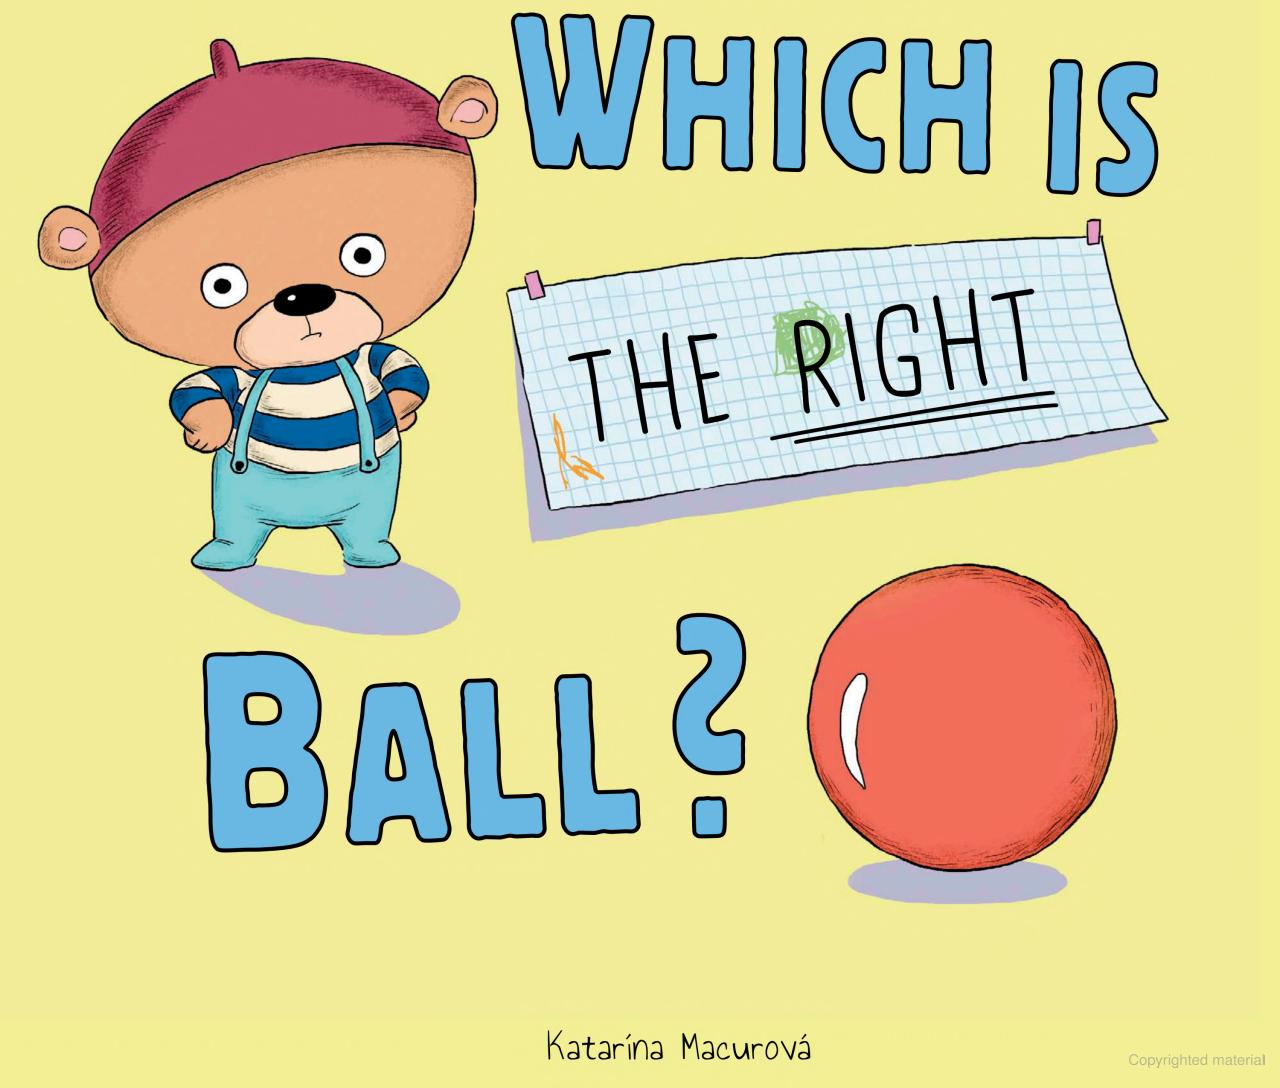 Which Is the Right Ball?